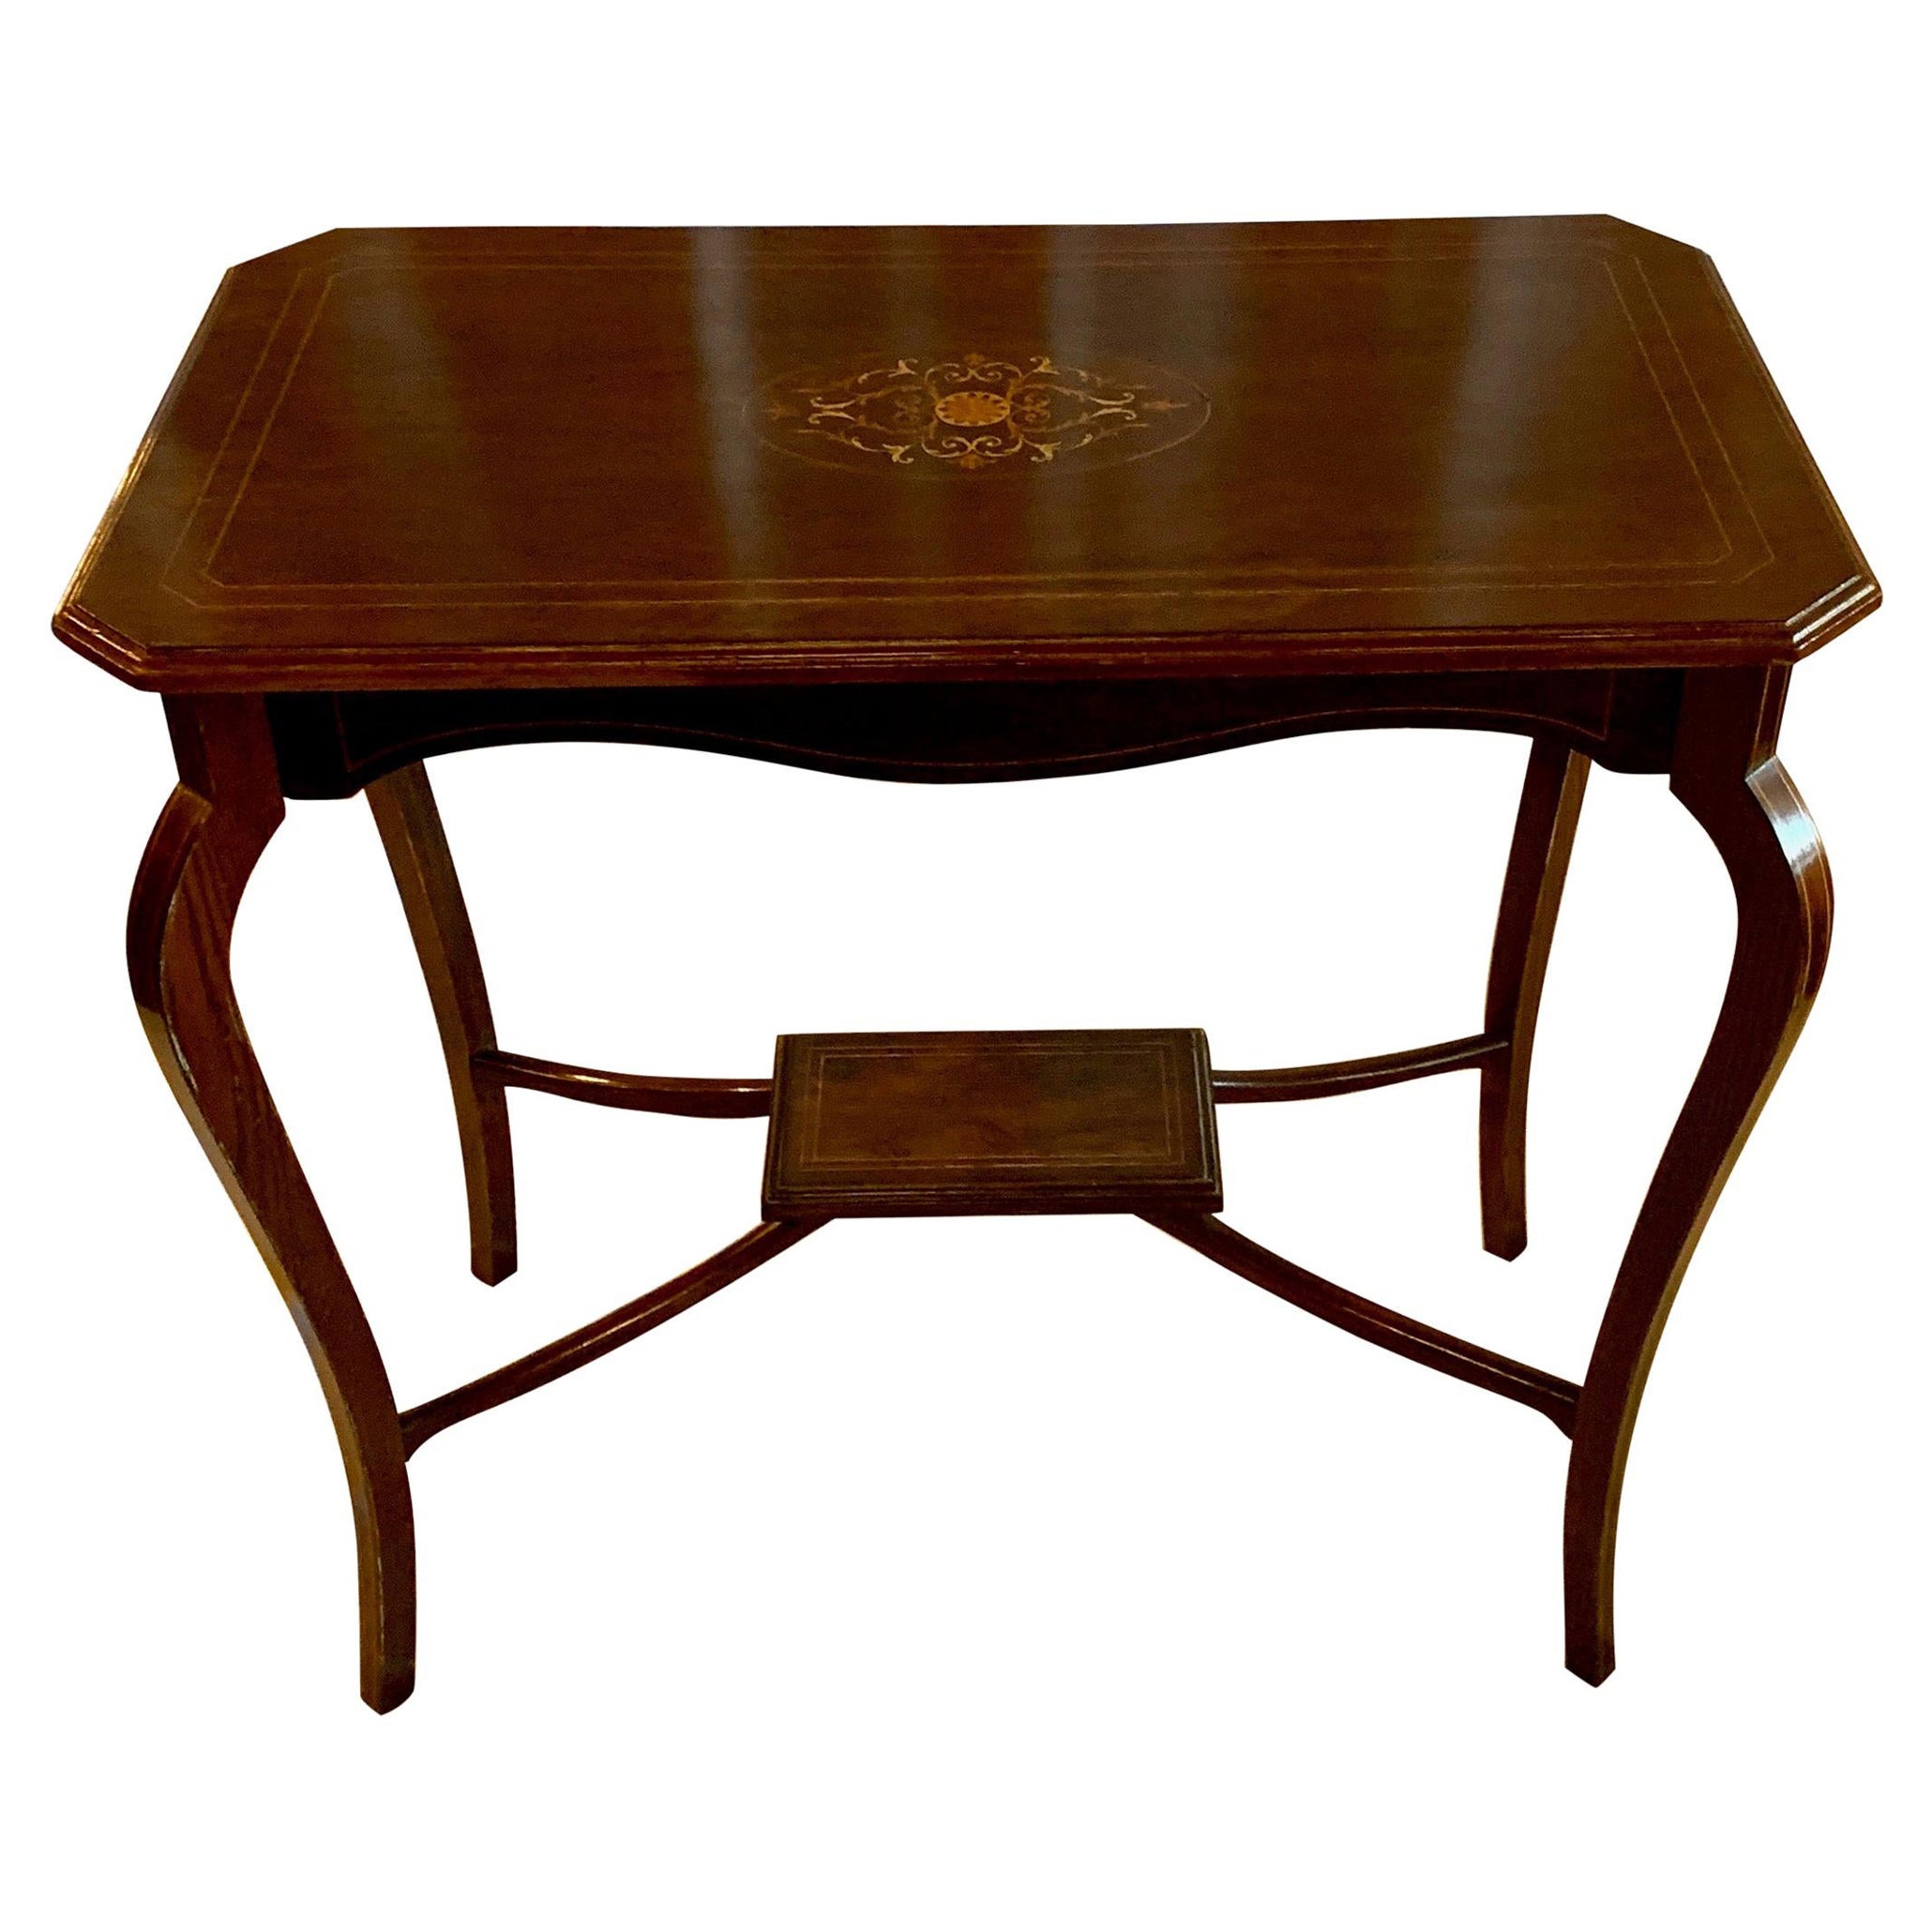 Antique Rosewood Inlaid Lamp Table circa 1860-1880 For Sale